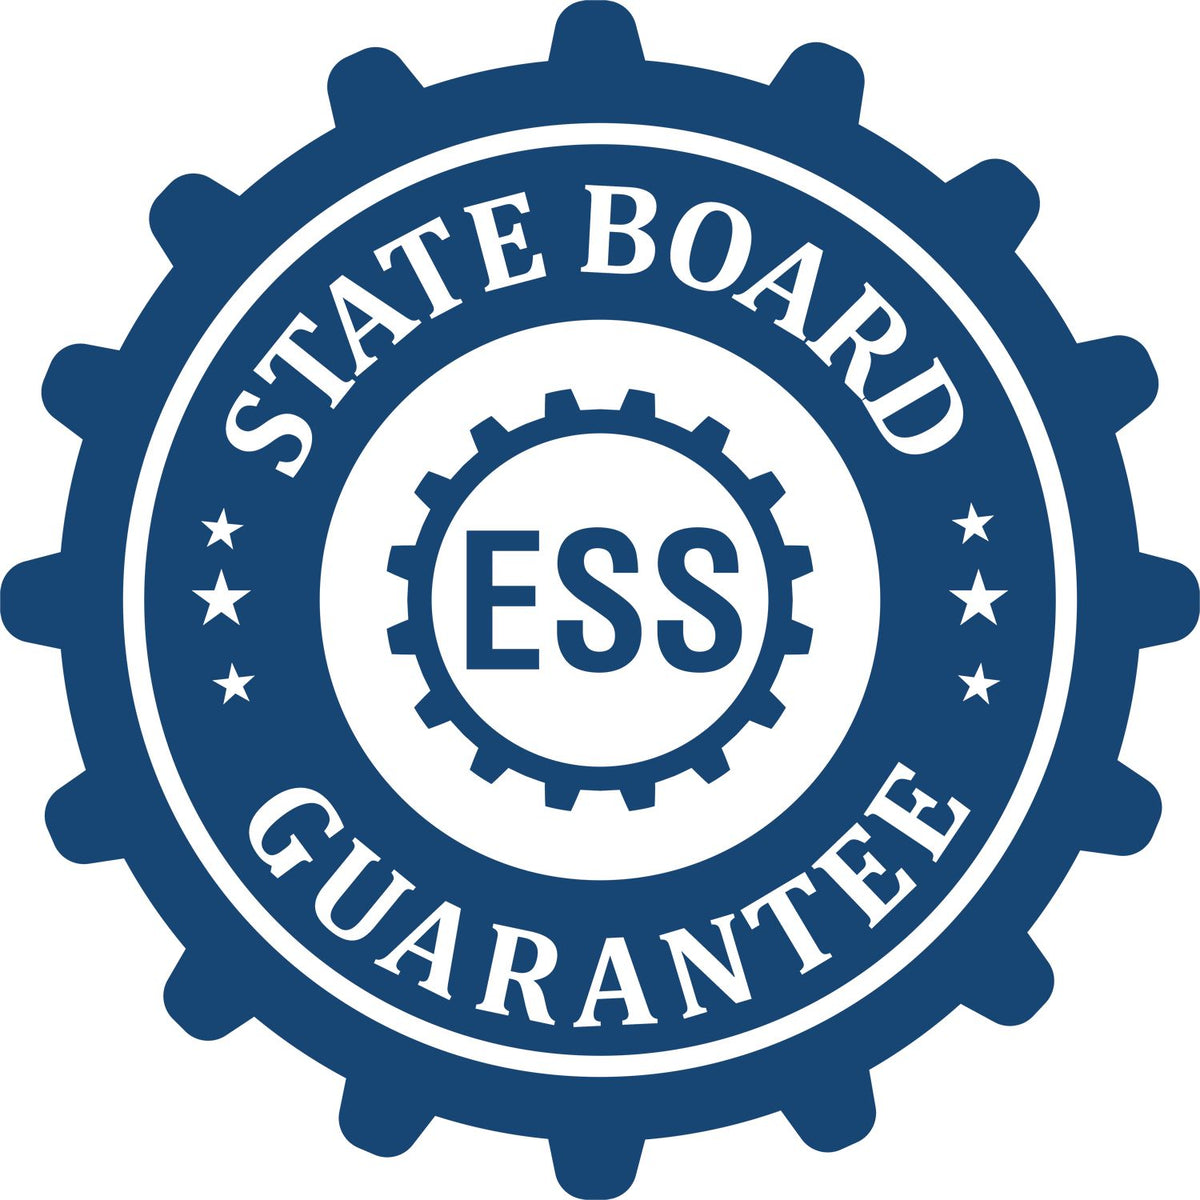 An emblem in a gear shape illustrating a state board guarantee for the Long Reach Maine Land Surveyor Seal product.